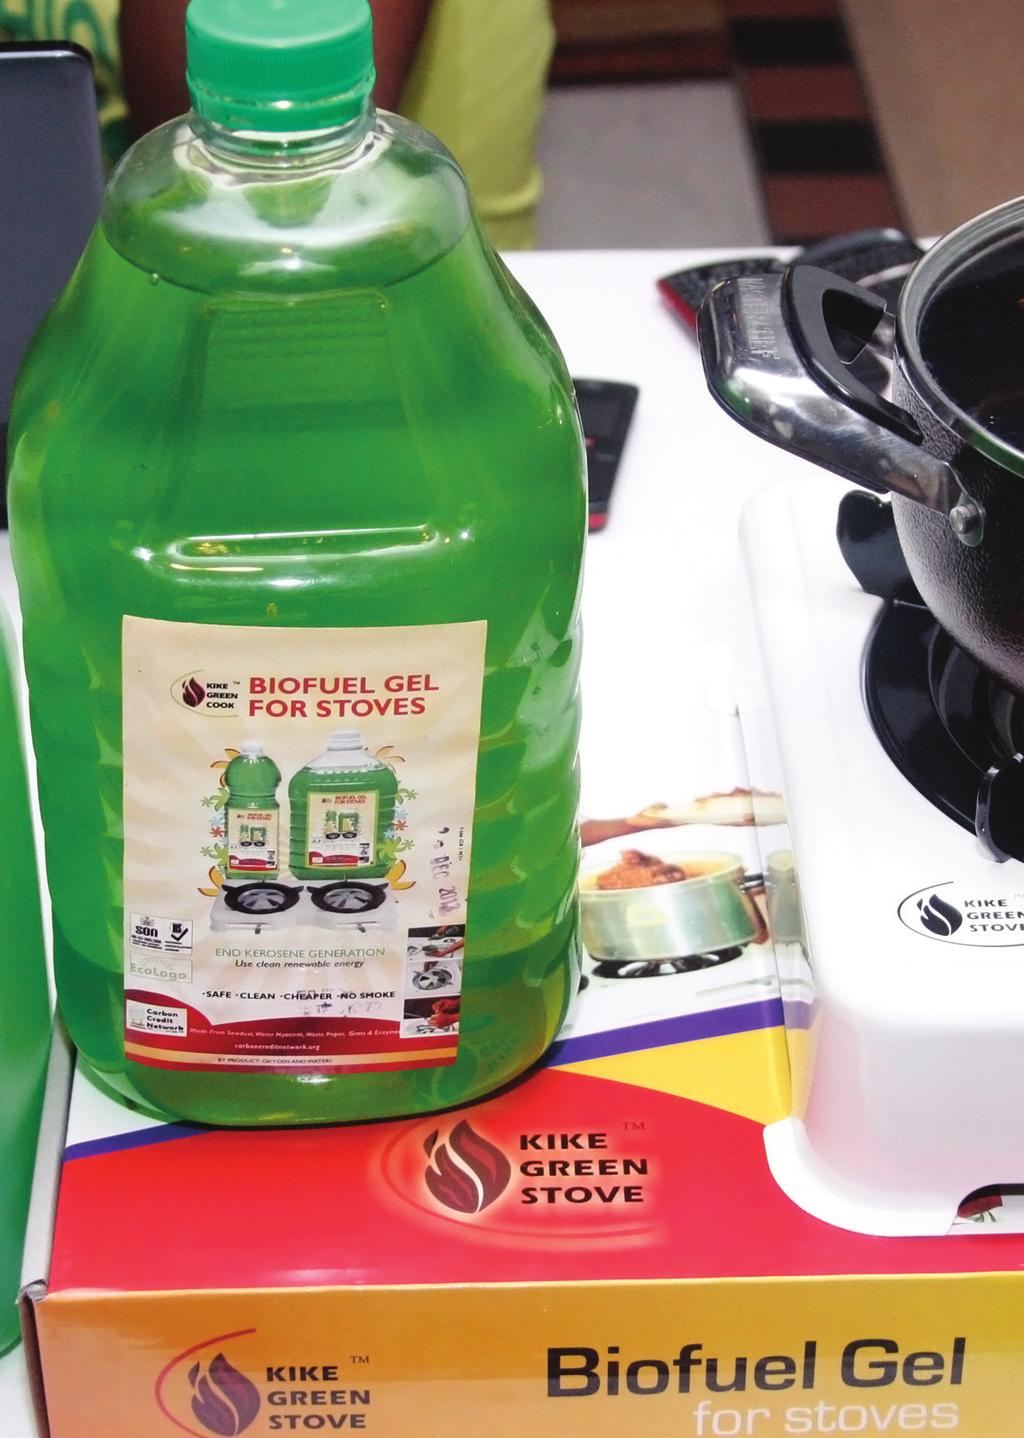 NEW INVESTMENT: GREEN ENERGY BIOFUELS LTD. Founded in 2012, Green Energy Biofuels Ltd. is one of Africa s fastest-growing clean cooking businesses.